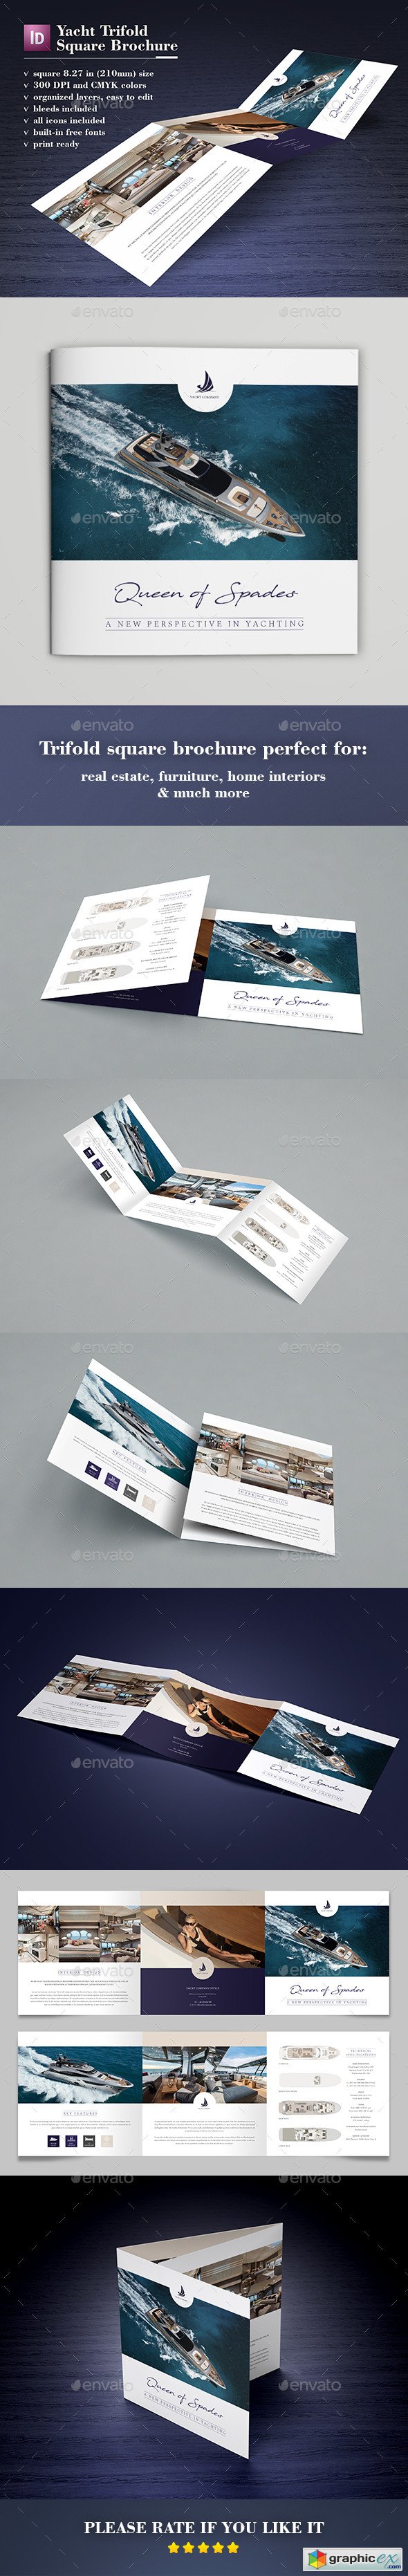 Yacht Trifold Square Brochure